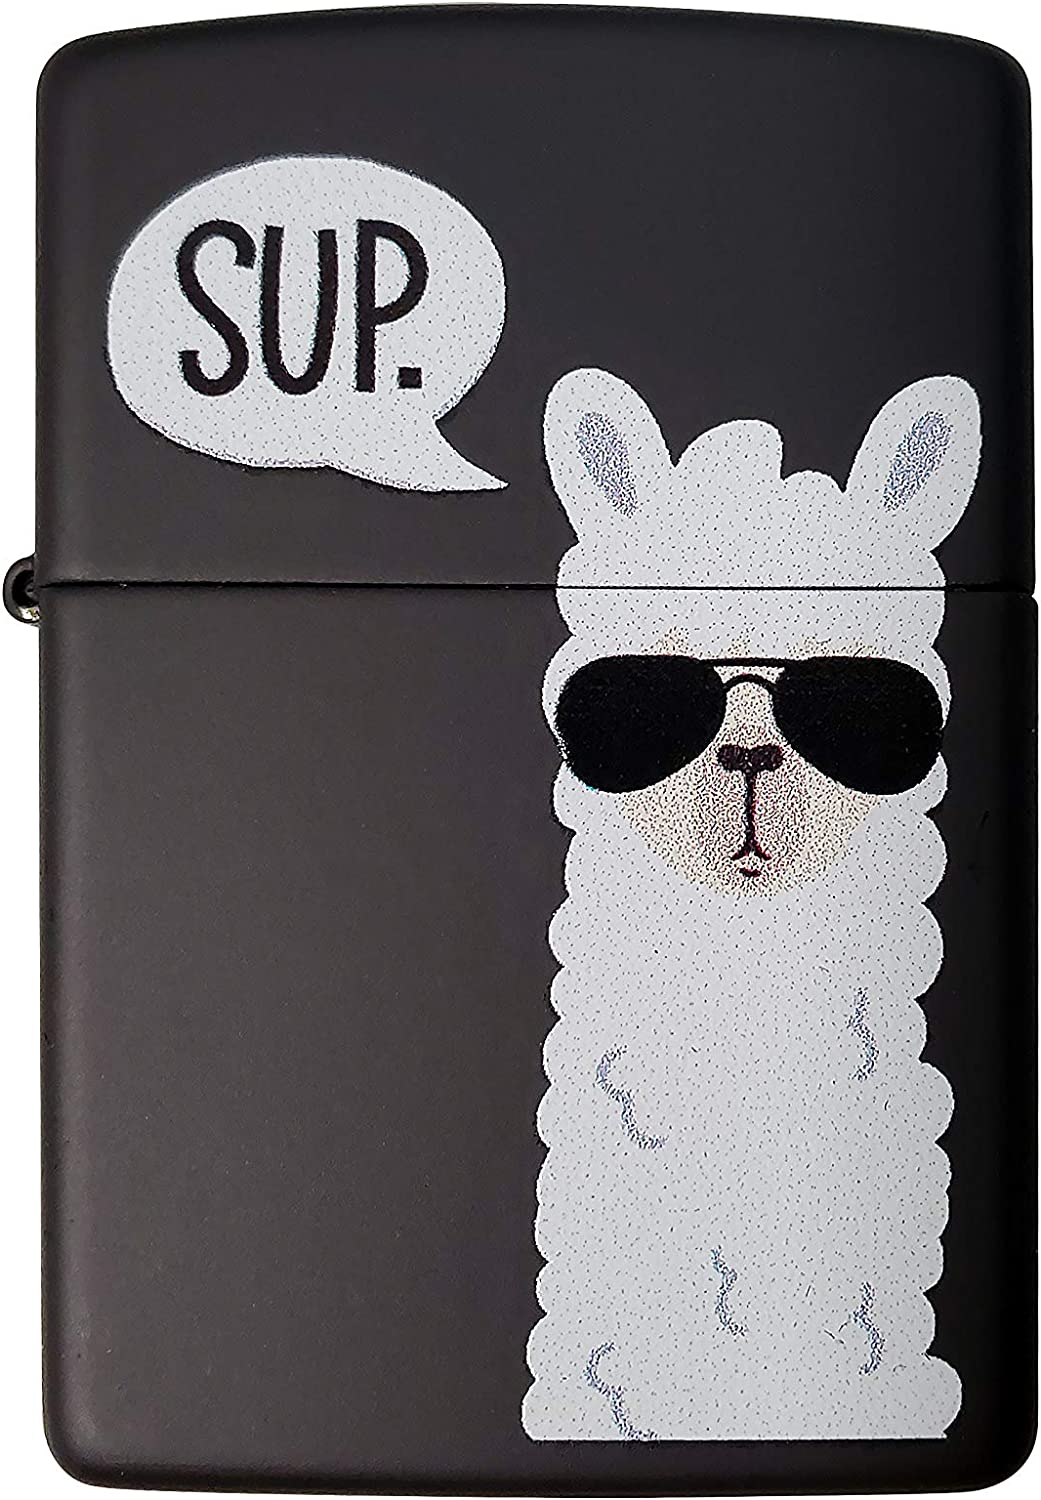 Chill Llama "Sup" with Cool Shades - Black Matte Zippo Lighter